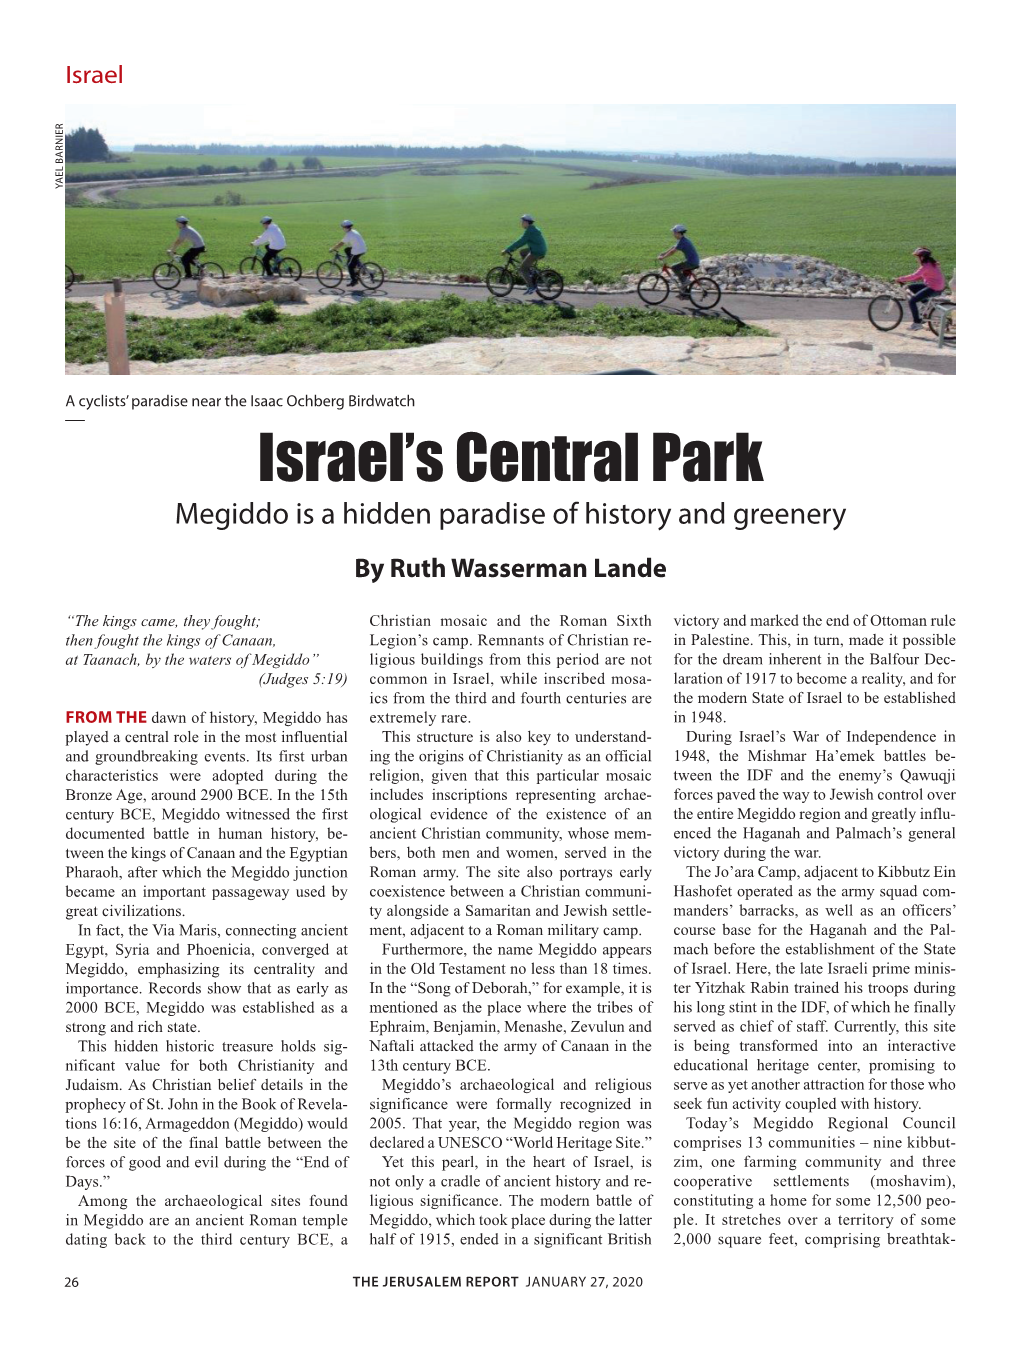 Israel's Central Park